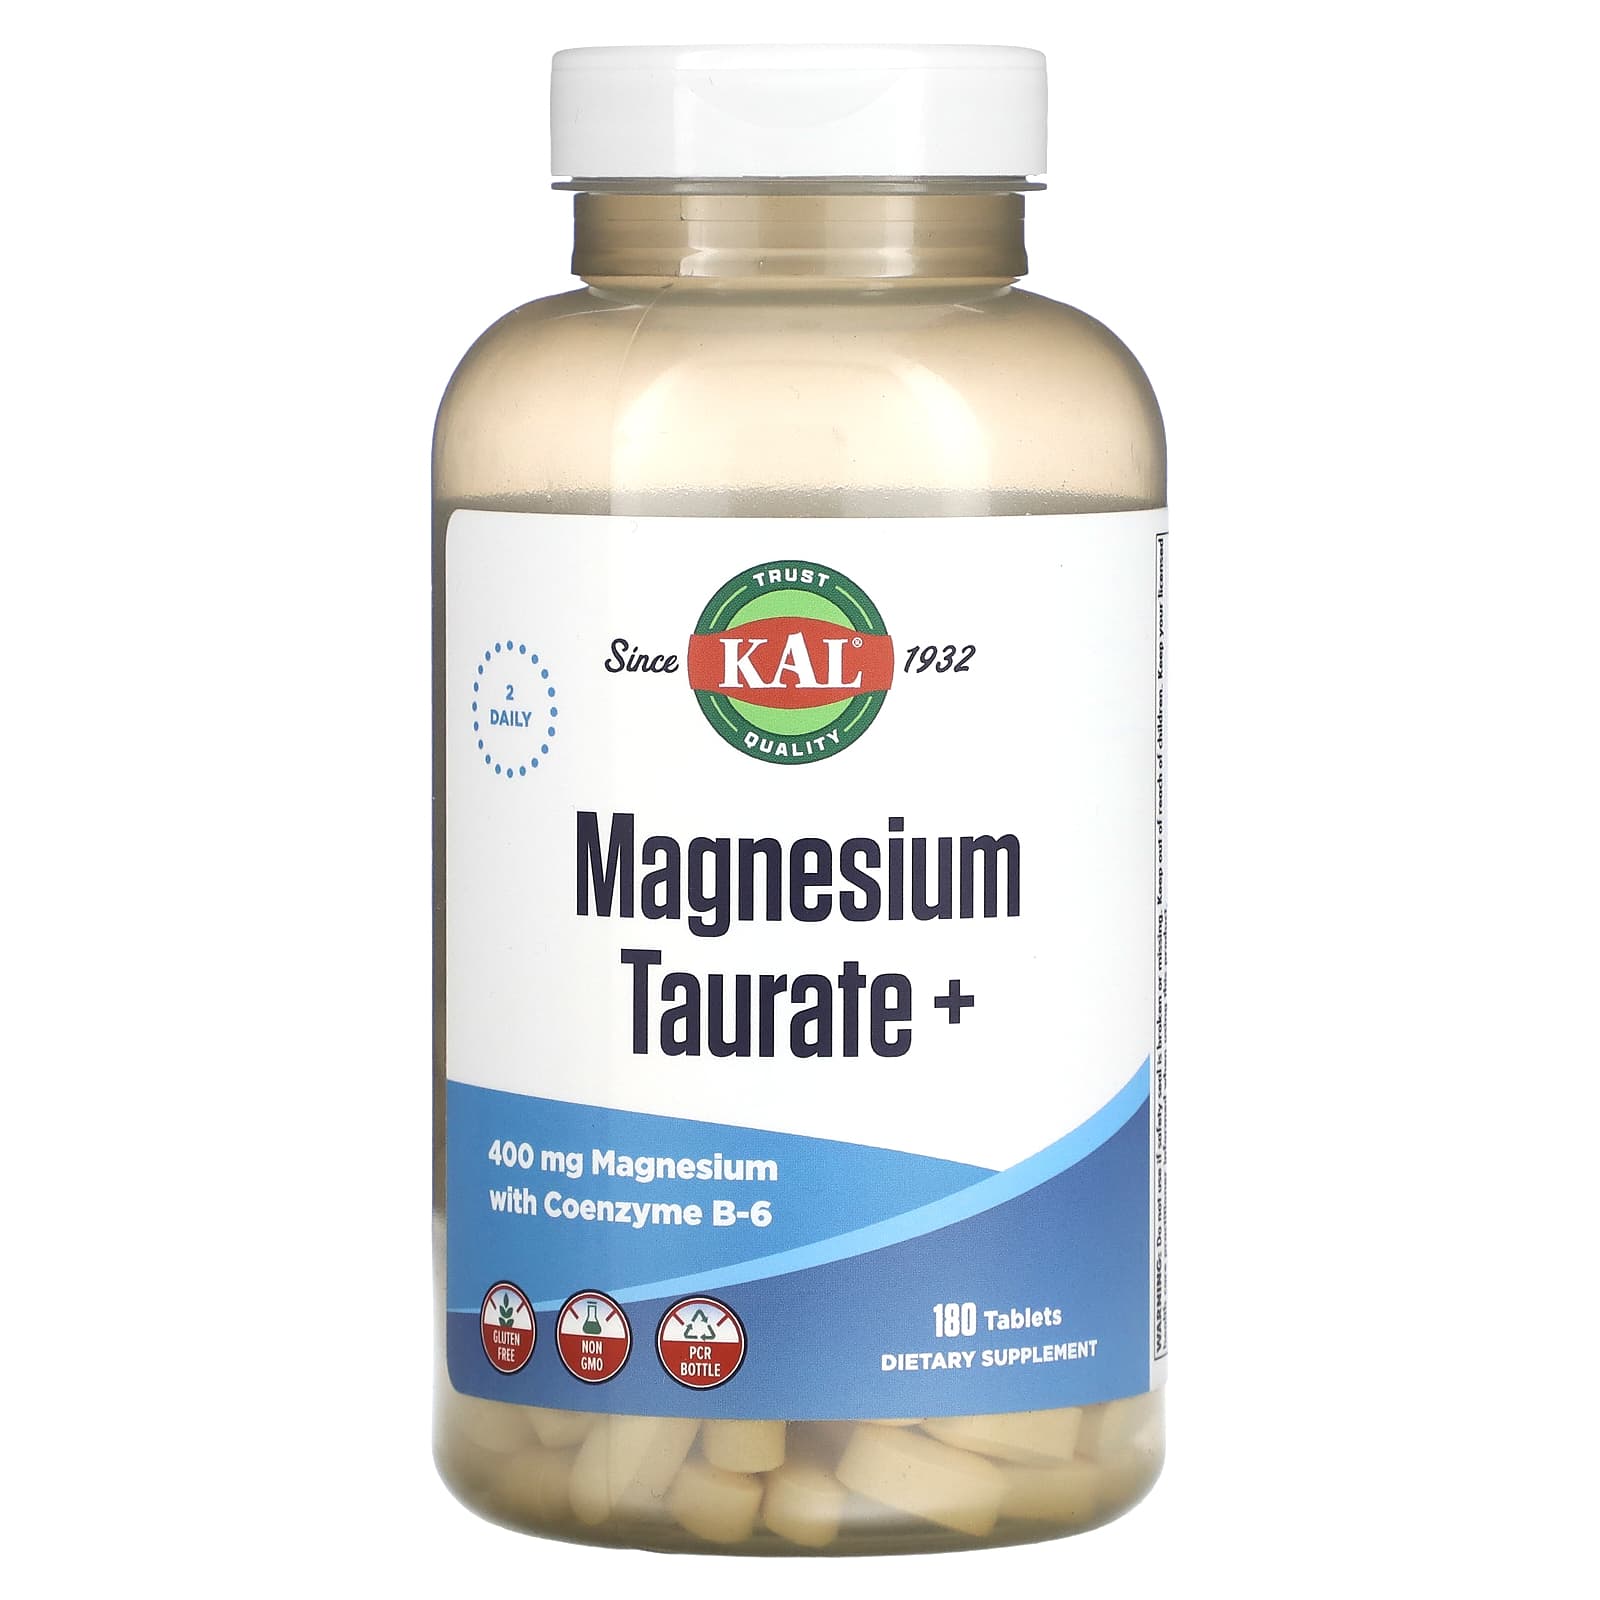 KAL, Magnesium Taurate +, 400 mg, 180 Tablets (200 mg per Tablet)